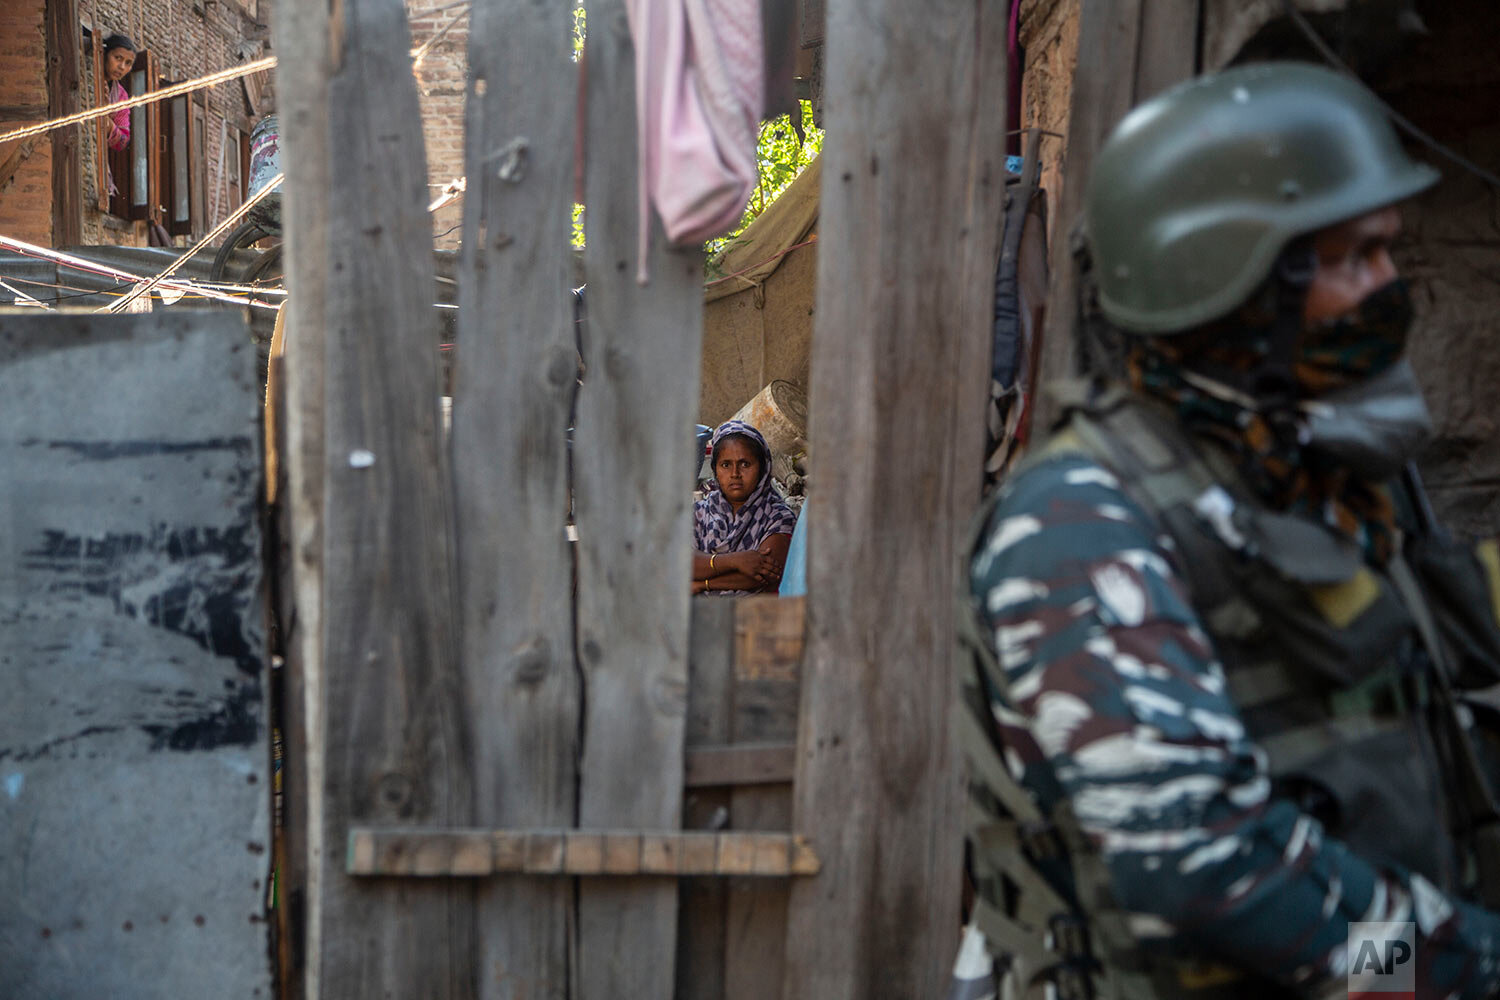  An Indian soldier keeps guard near the site of a grenade attack on a security force post in Srinagar, Indian controlled Kashmir, Sunday, June 26, 2021. (AP Photo/Mukhtar Khan) 